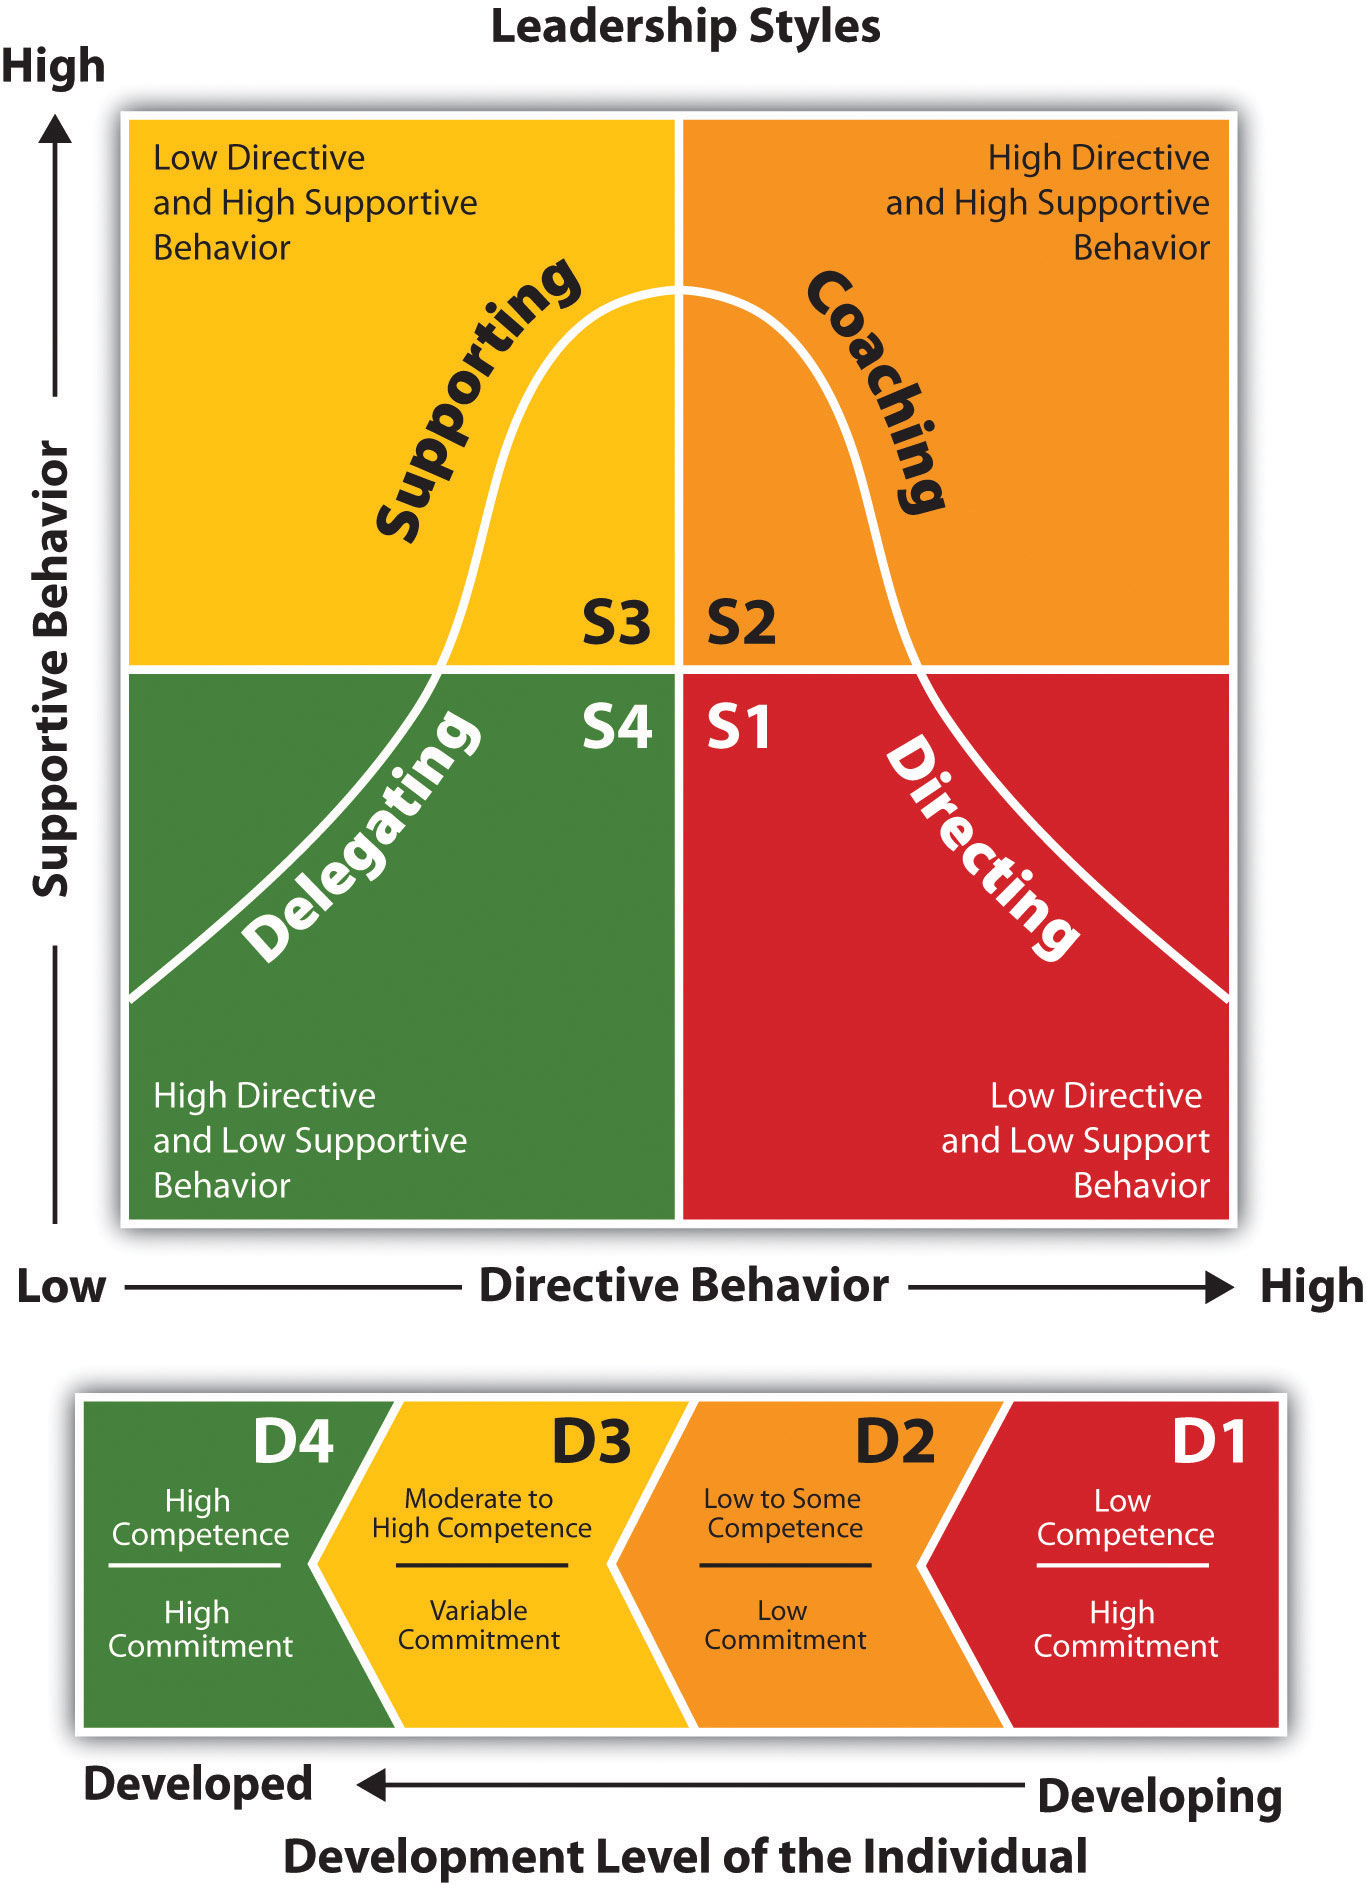 Four Basic Leadership Styles Used by Situational Managers